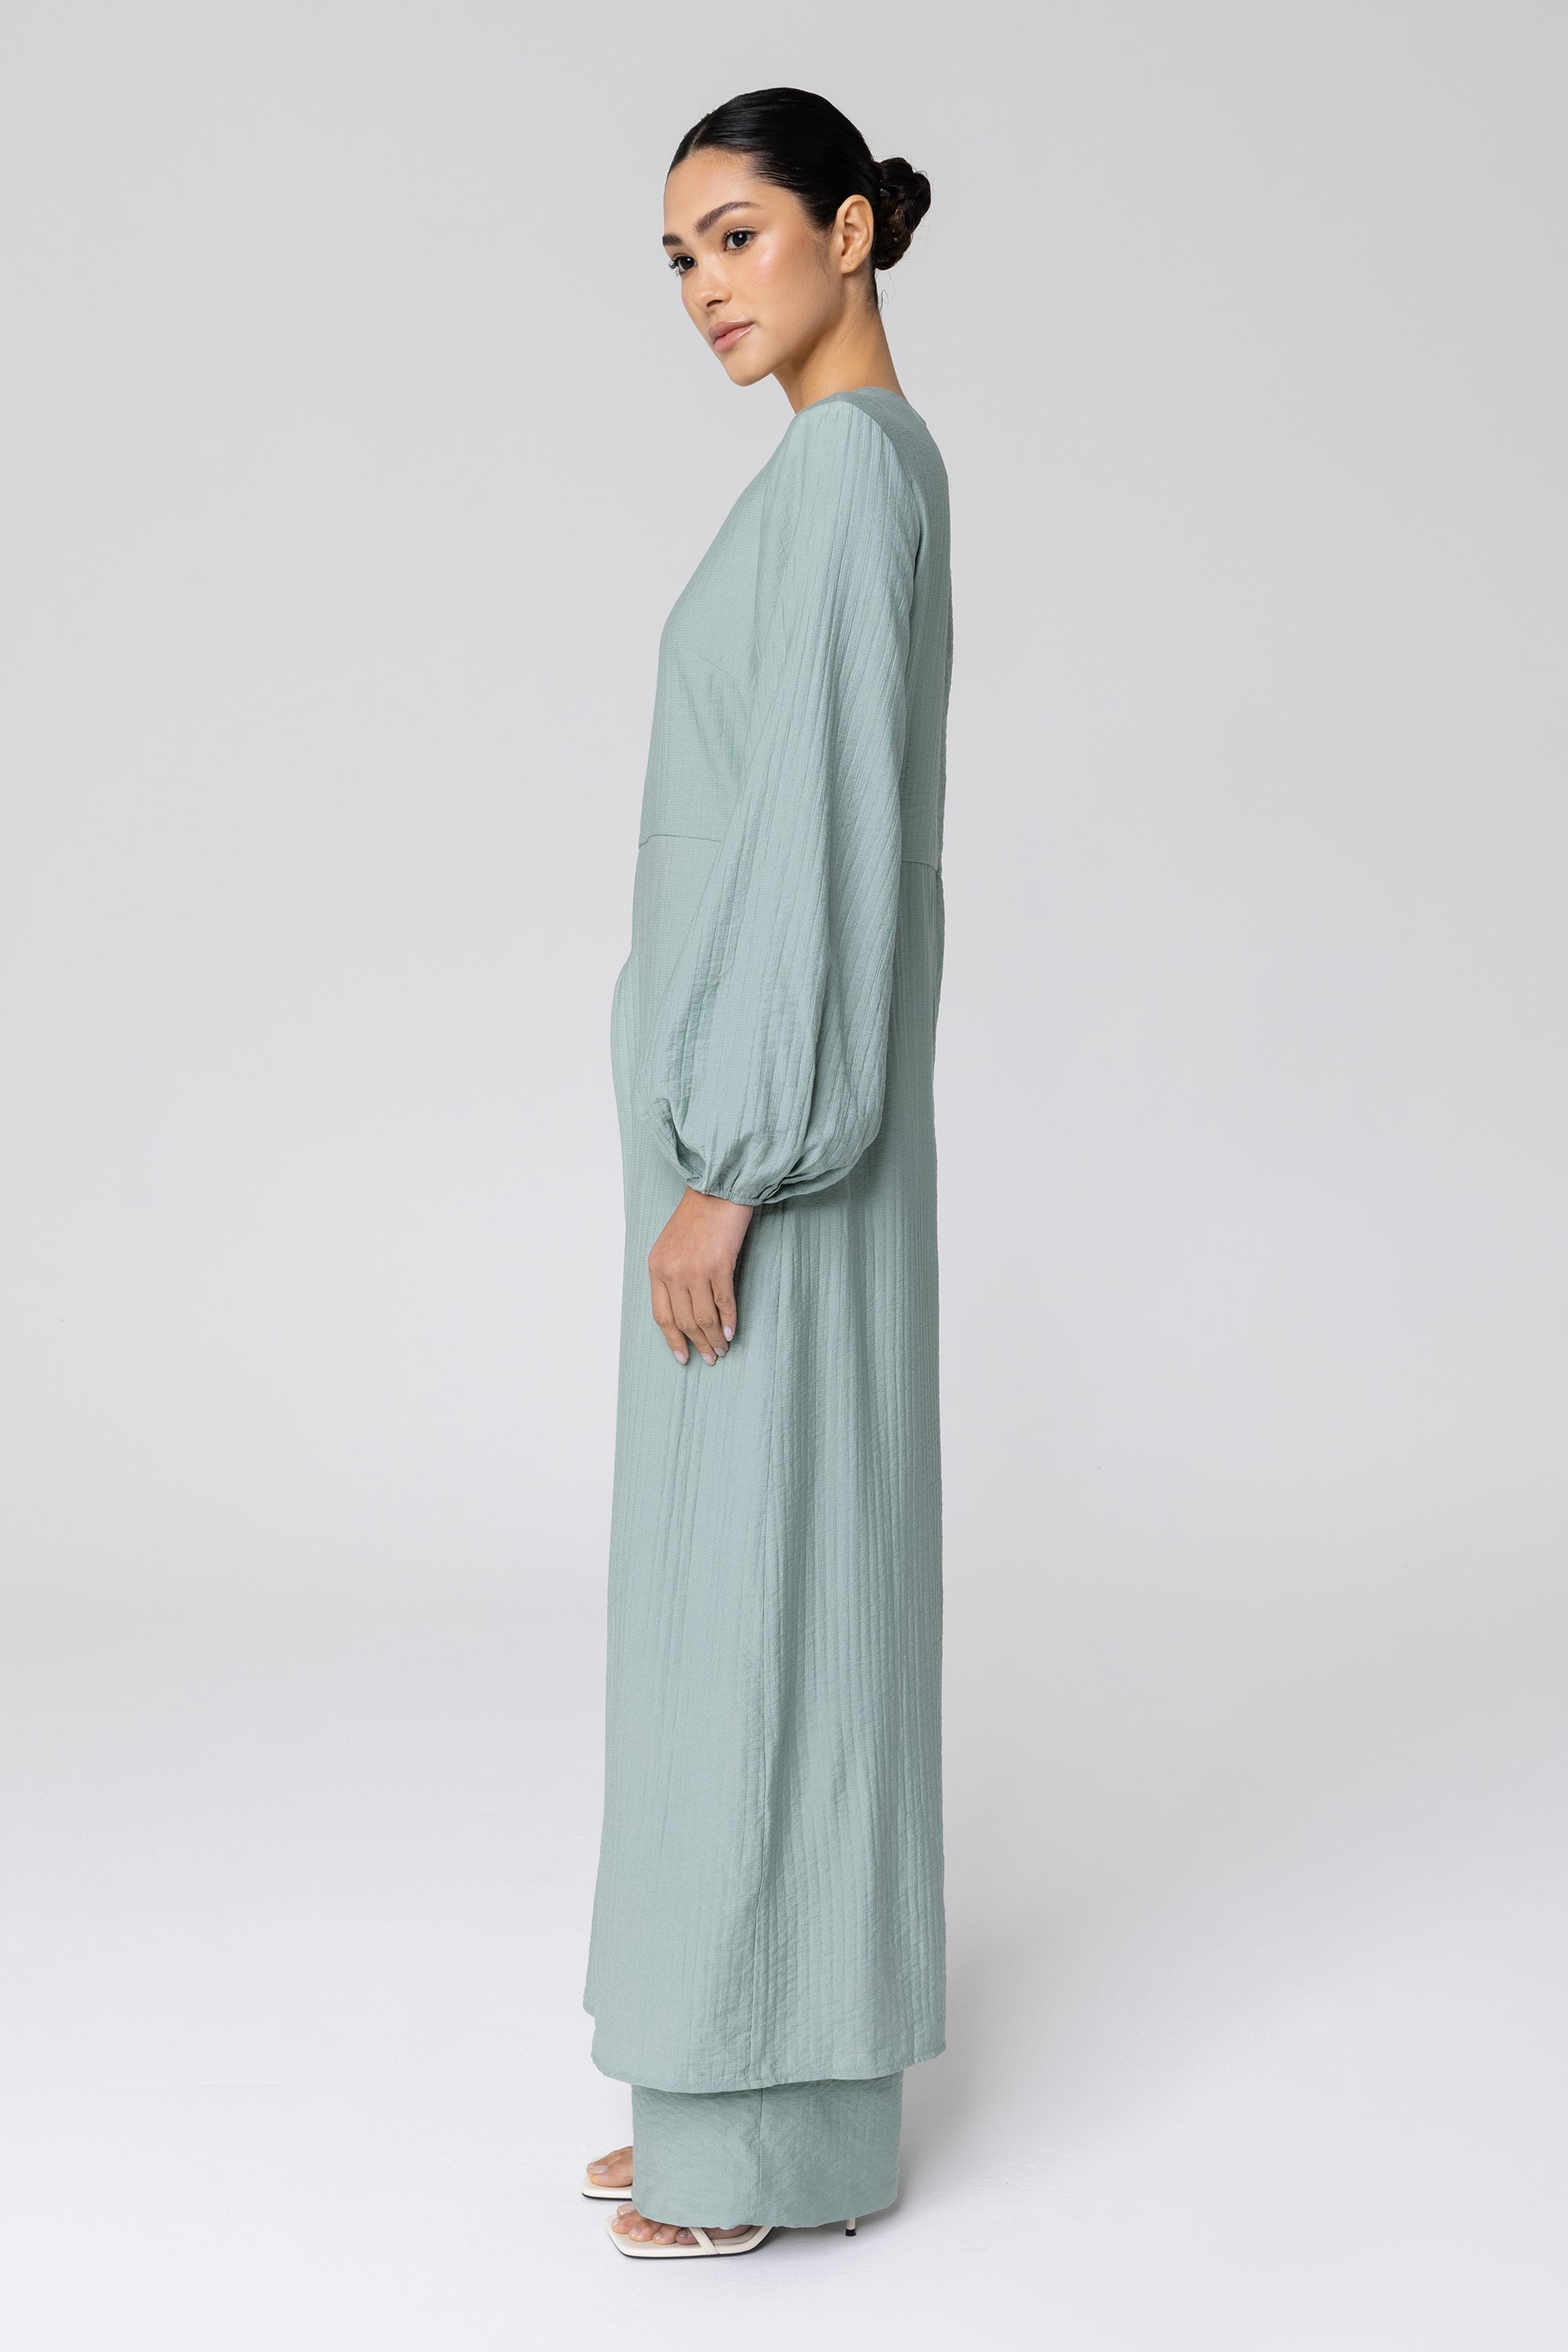 Lia Split Front Maxi Tunic - Sage Veiled Collection 